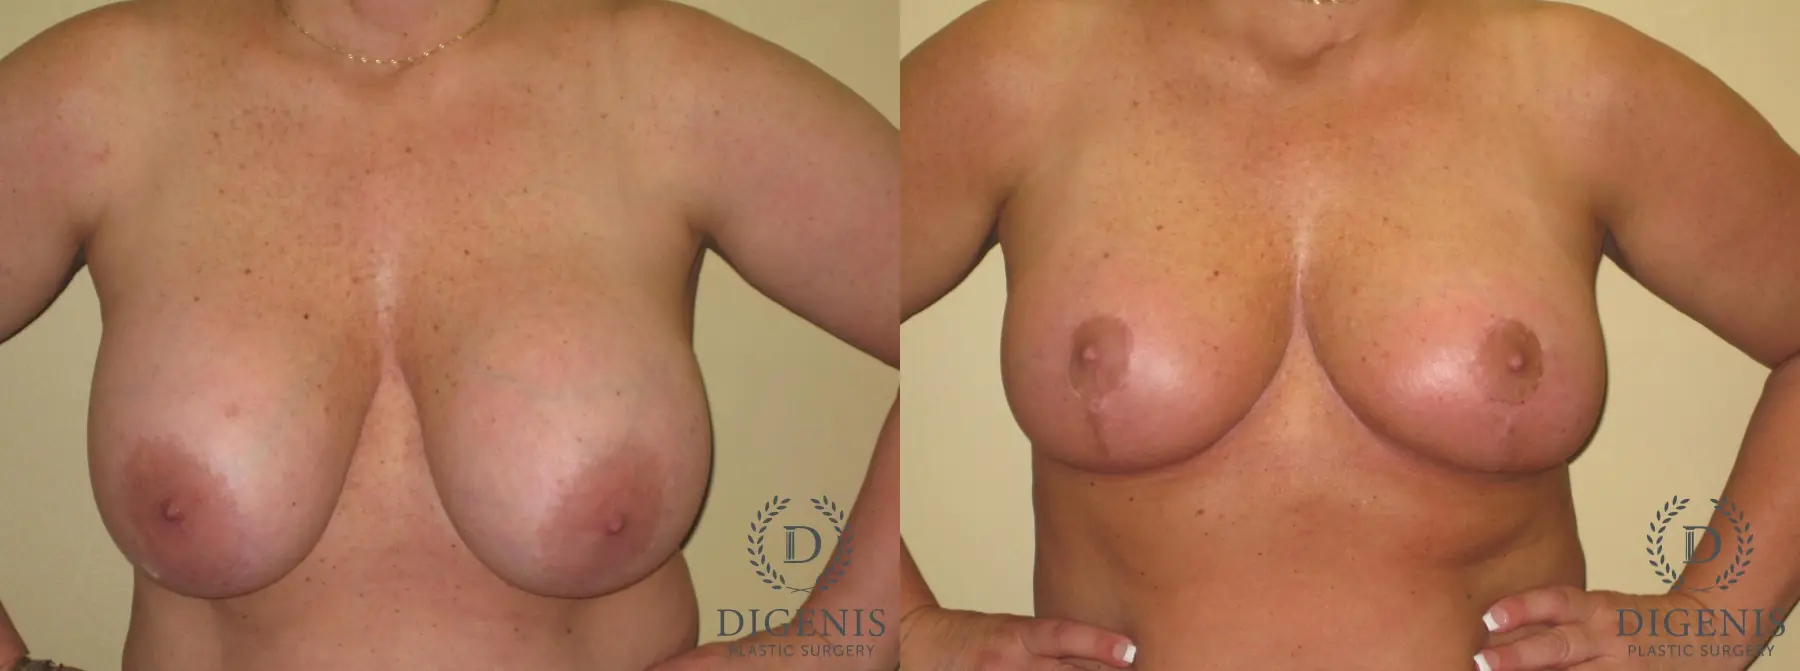 Breast Lift With Implants: Patient 7 - Before and After 1